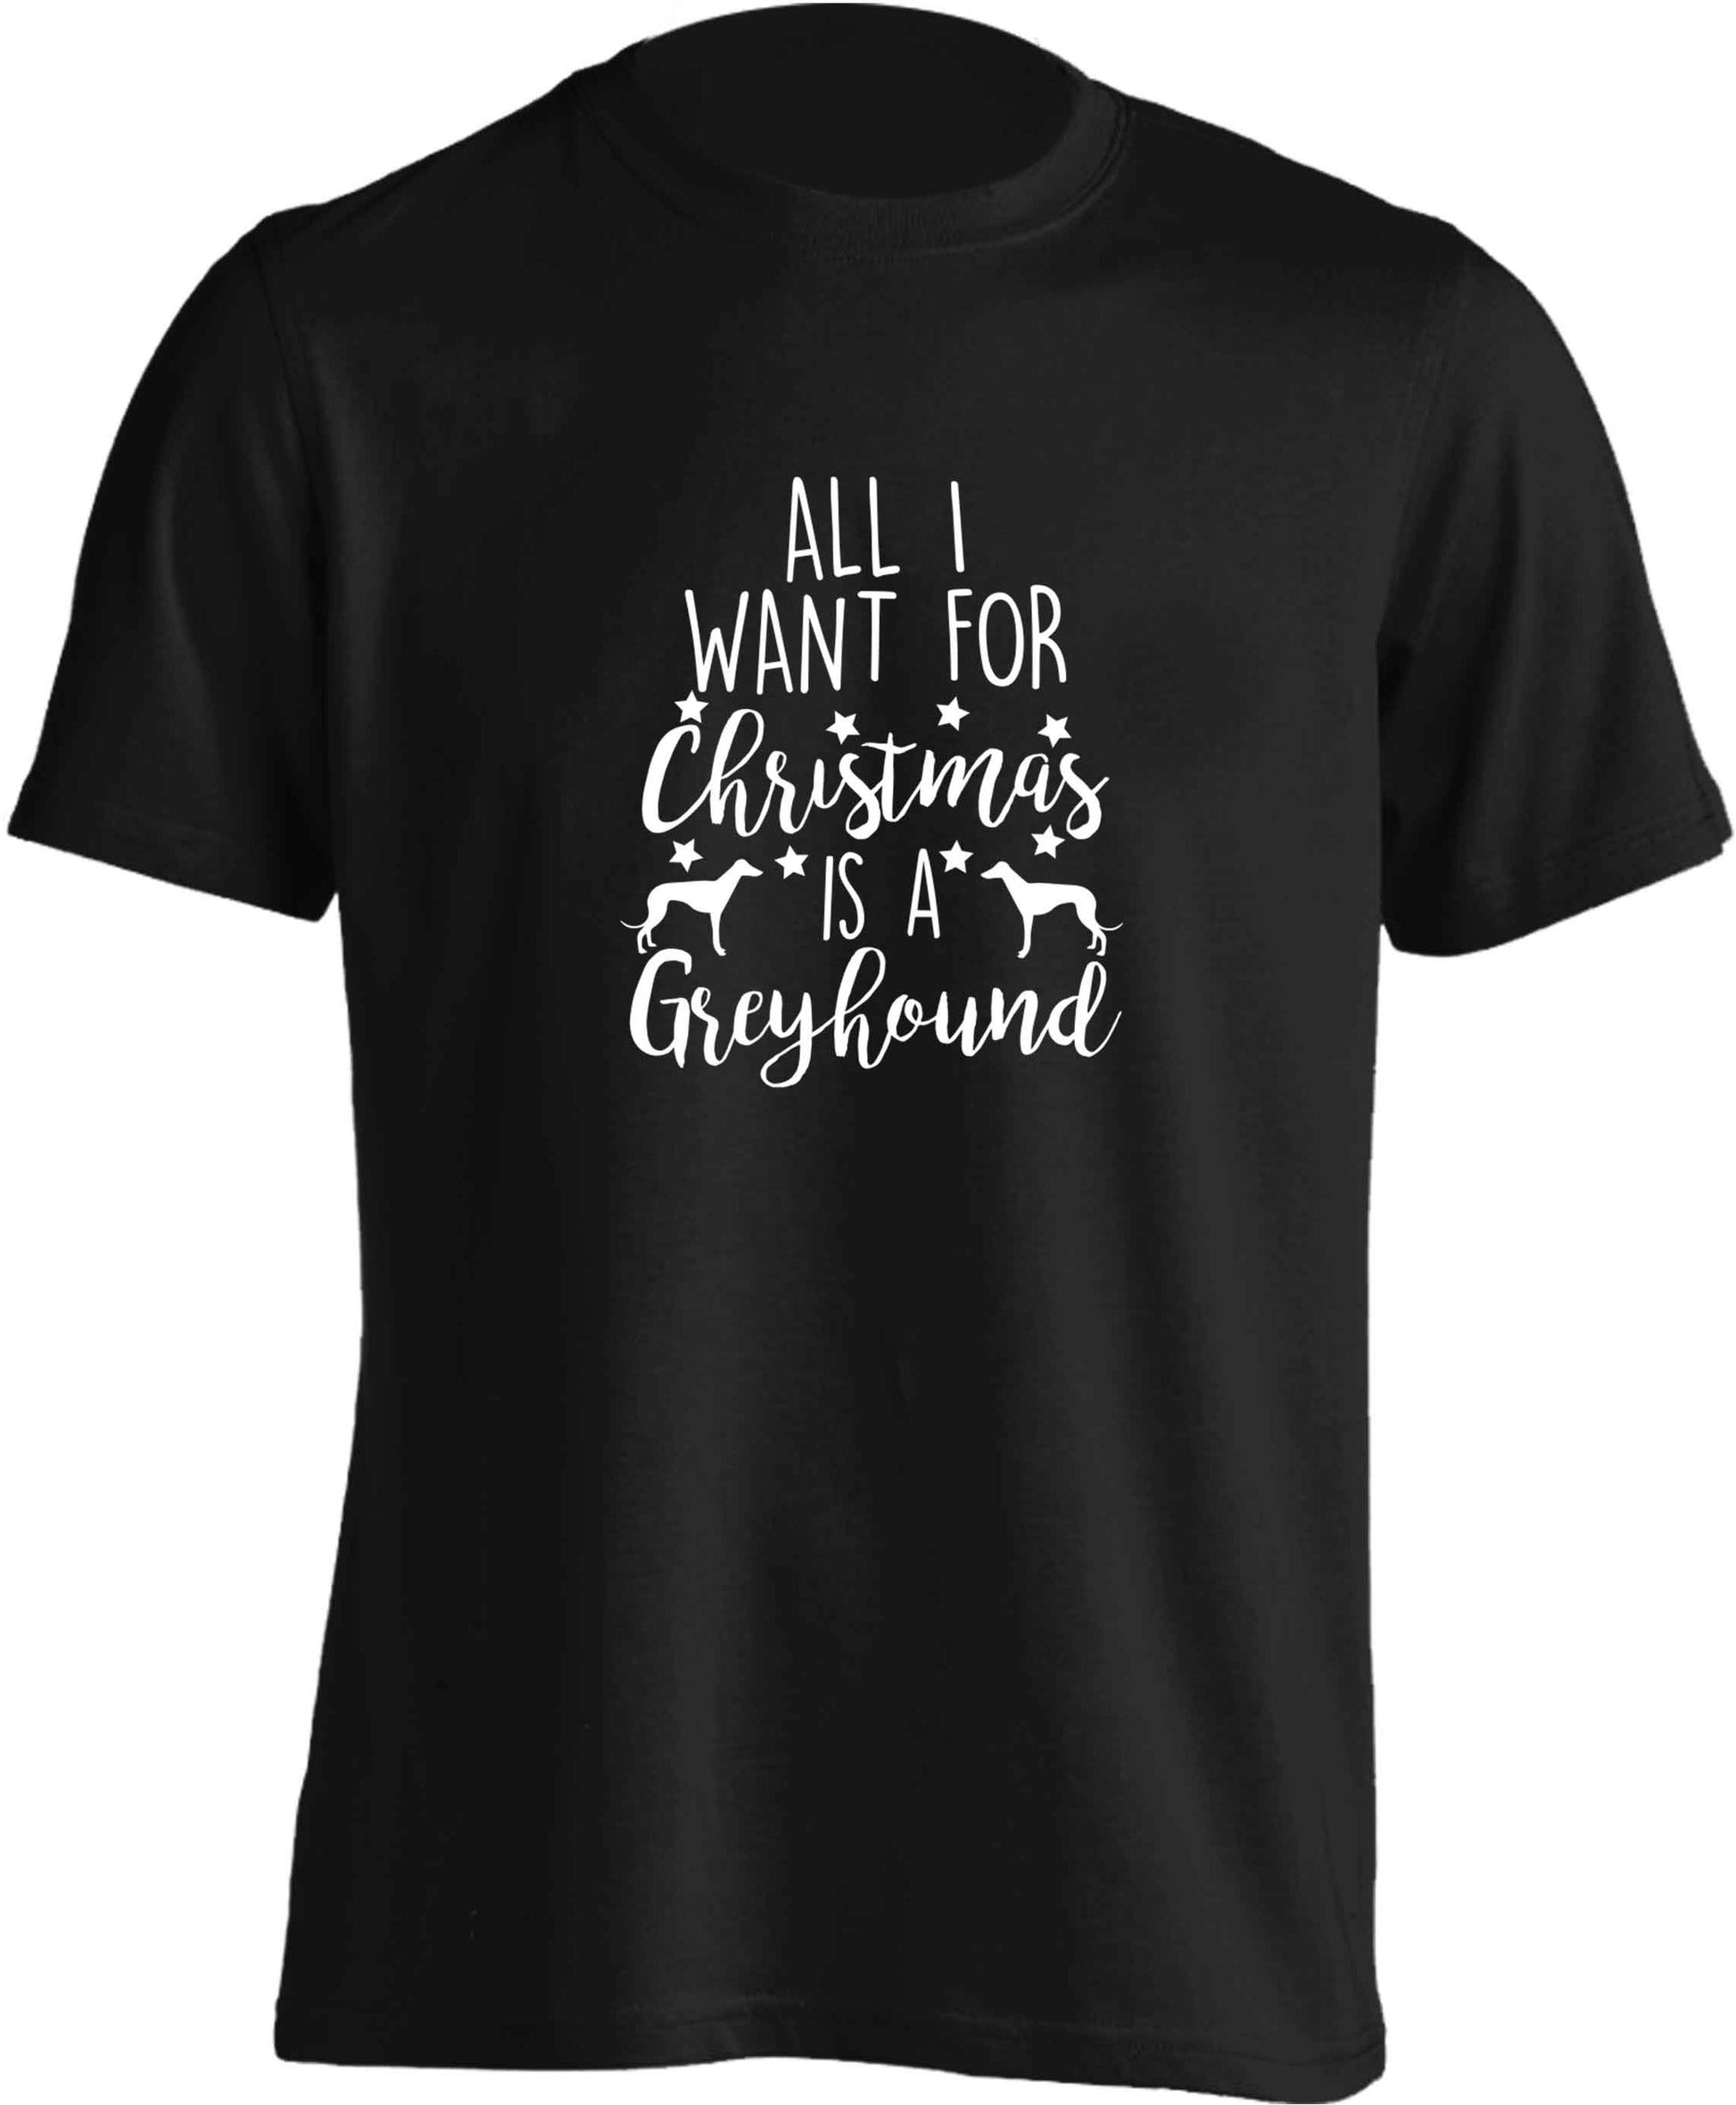 All I want for Christmas is a greyhound adults unisex black Tshirt 2XL